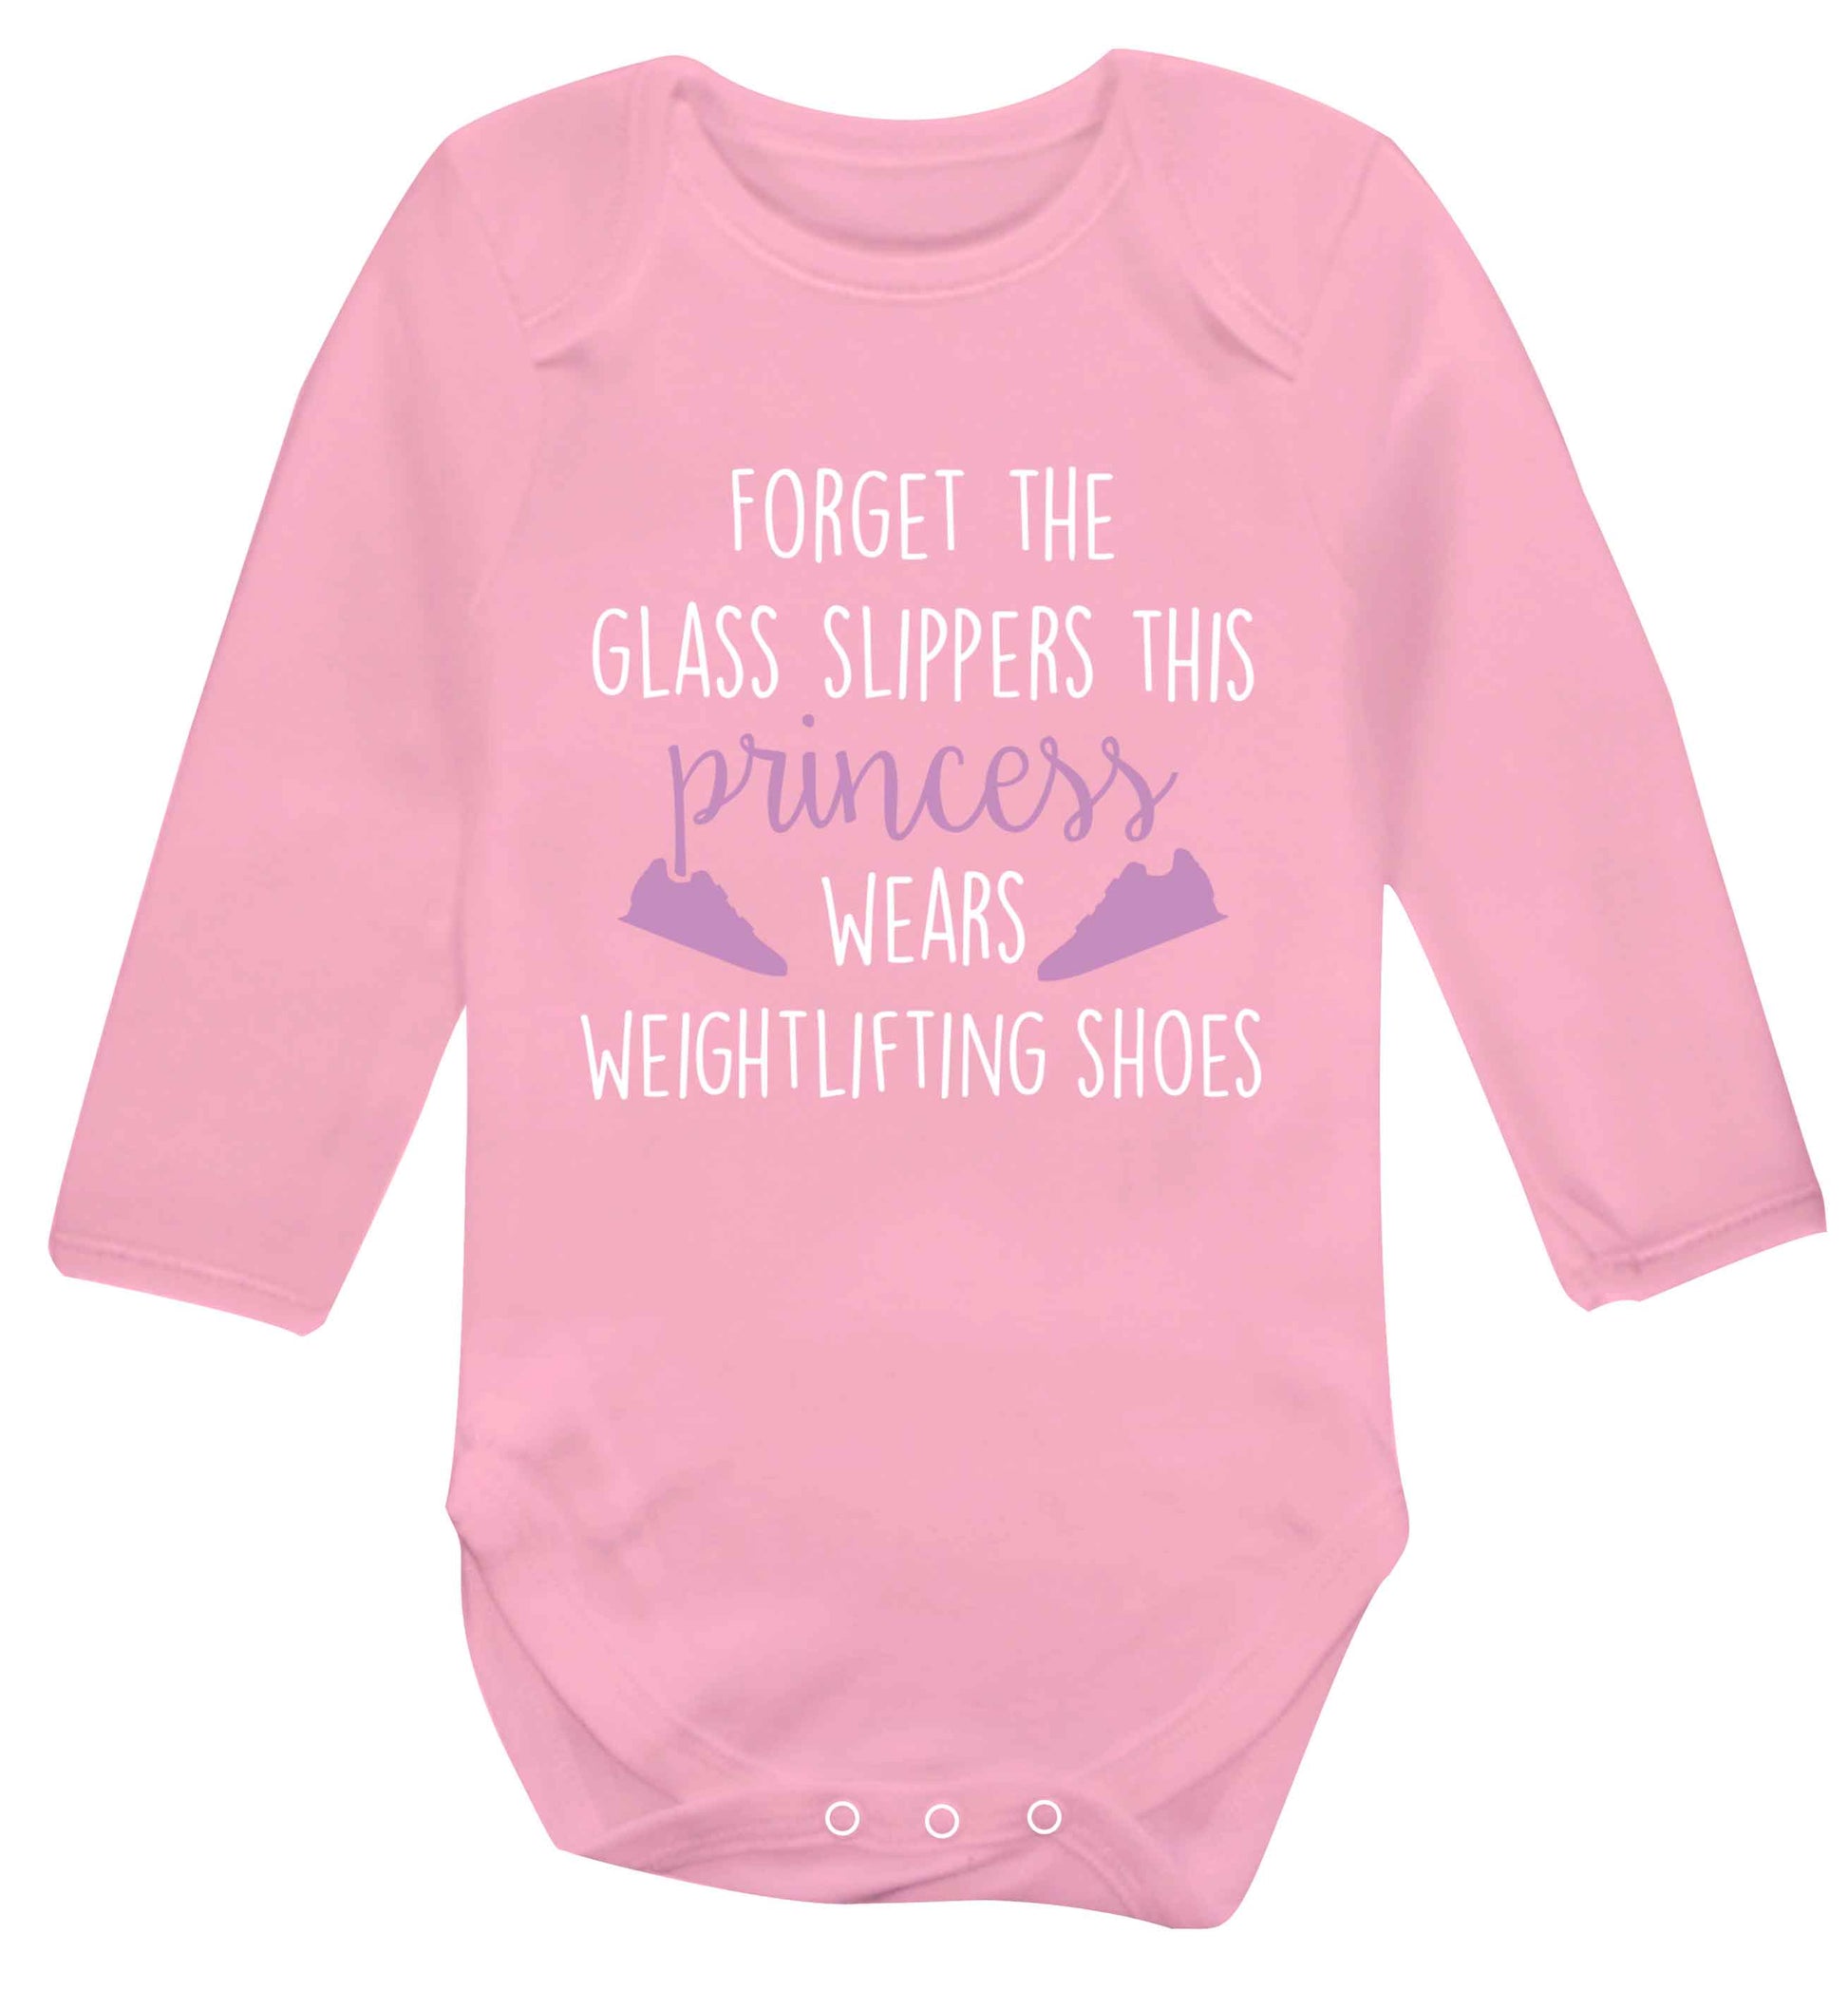 Forget the glass slippers this princess wears weightlifting shoes Baby Vest long sleeved pale pink 6-12 months